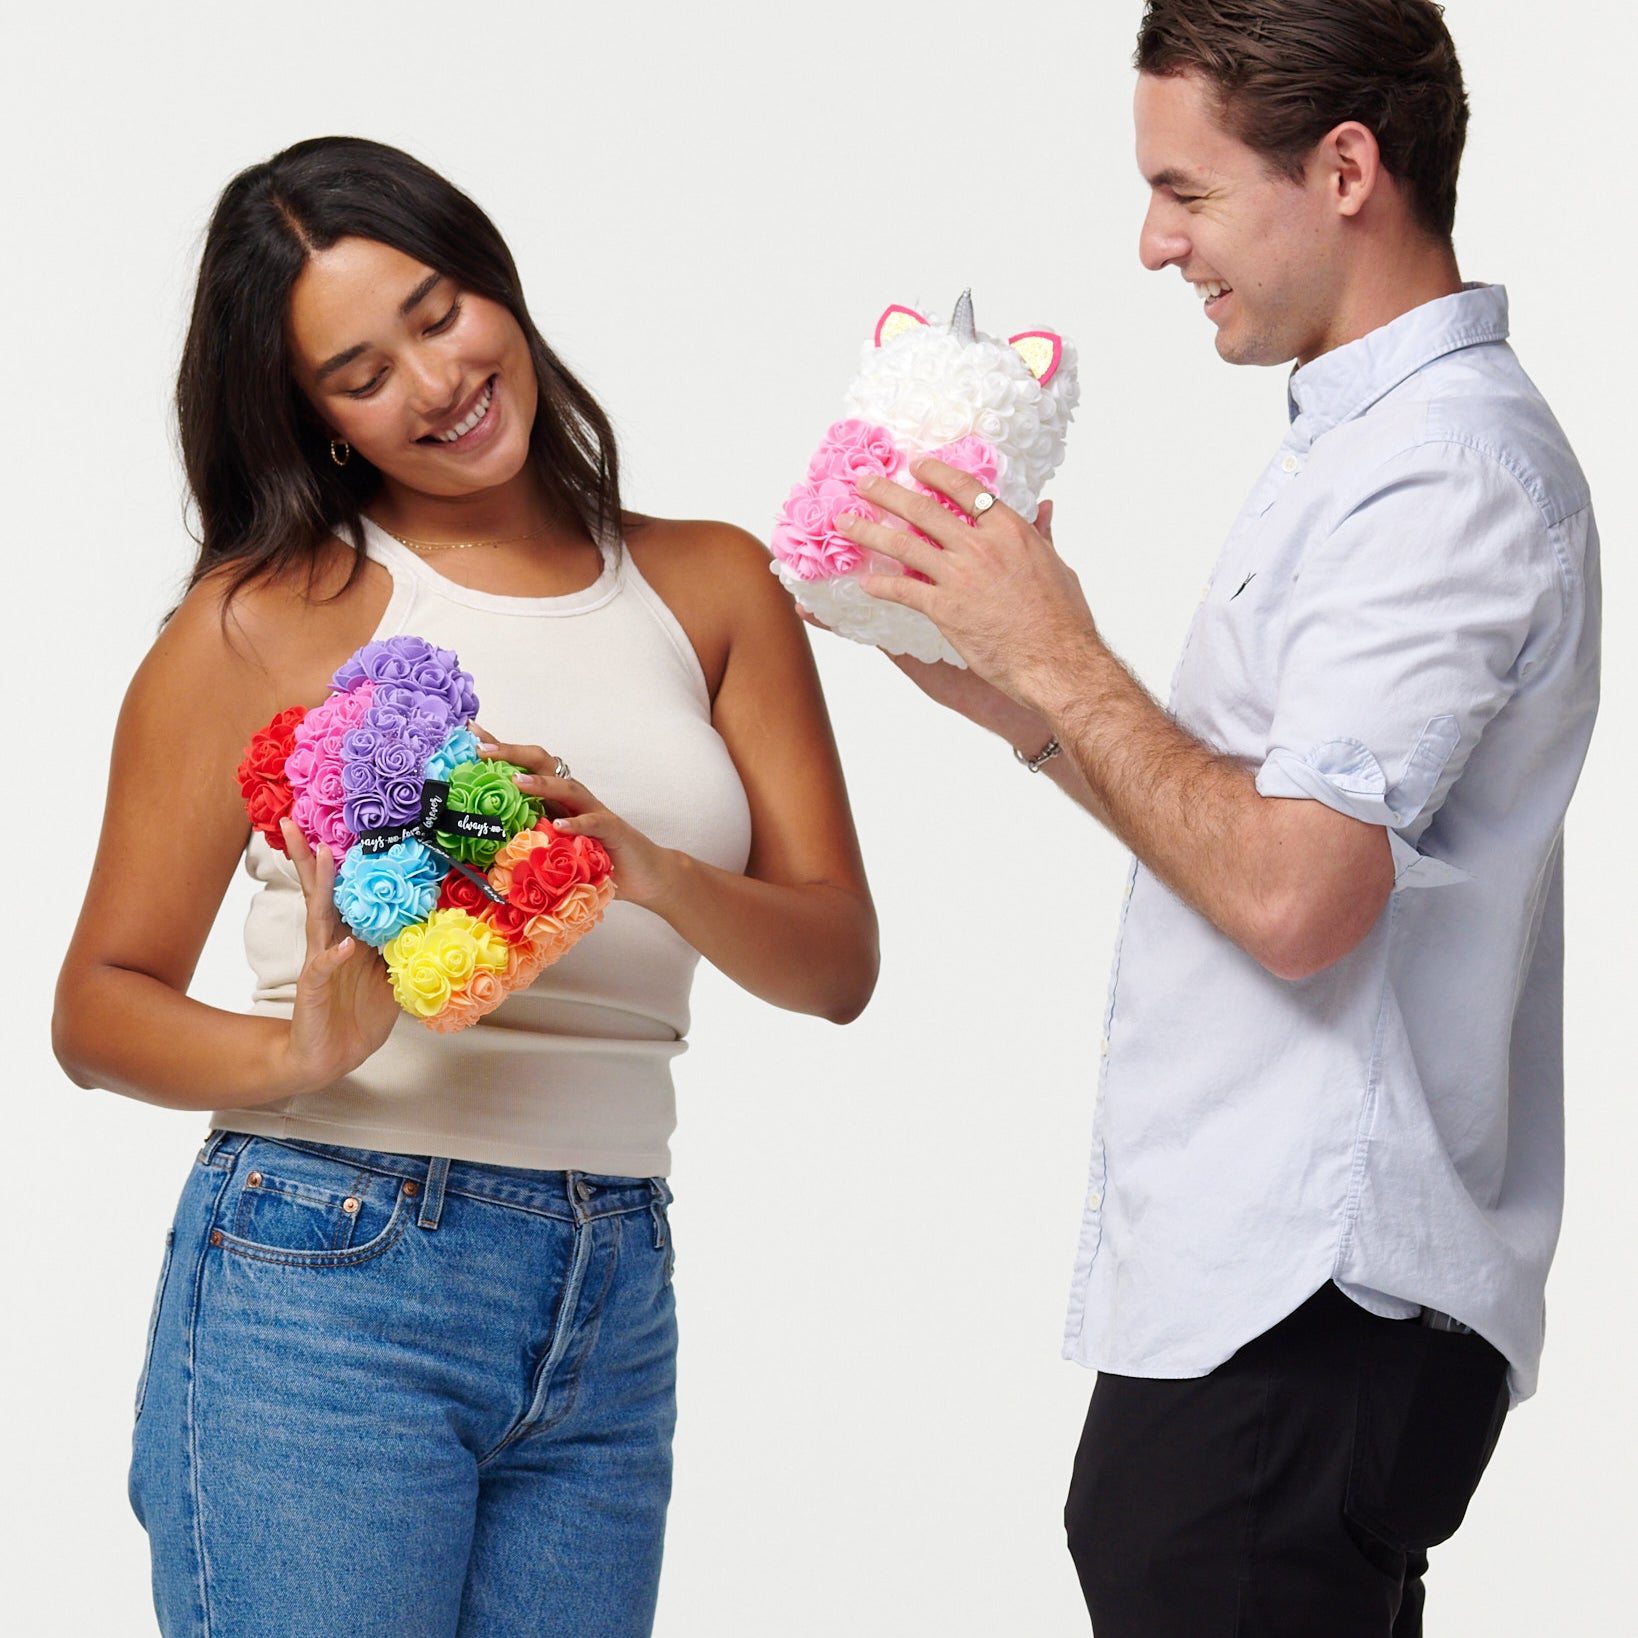 A female model in a beige tank top and blue jeans is holding a multicolored flower bear, looking down at it with a smile. Next to her, a male model in a light blue button-up shirt and black pants is admiring a white flower unicorn he holds, which has pink flowers for its mane and a silver horn. They both appear cheerful and are engaging with the artificial flower animals, creating a light-hearted and happy scene